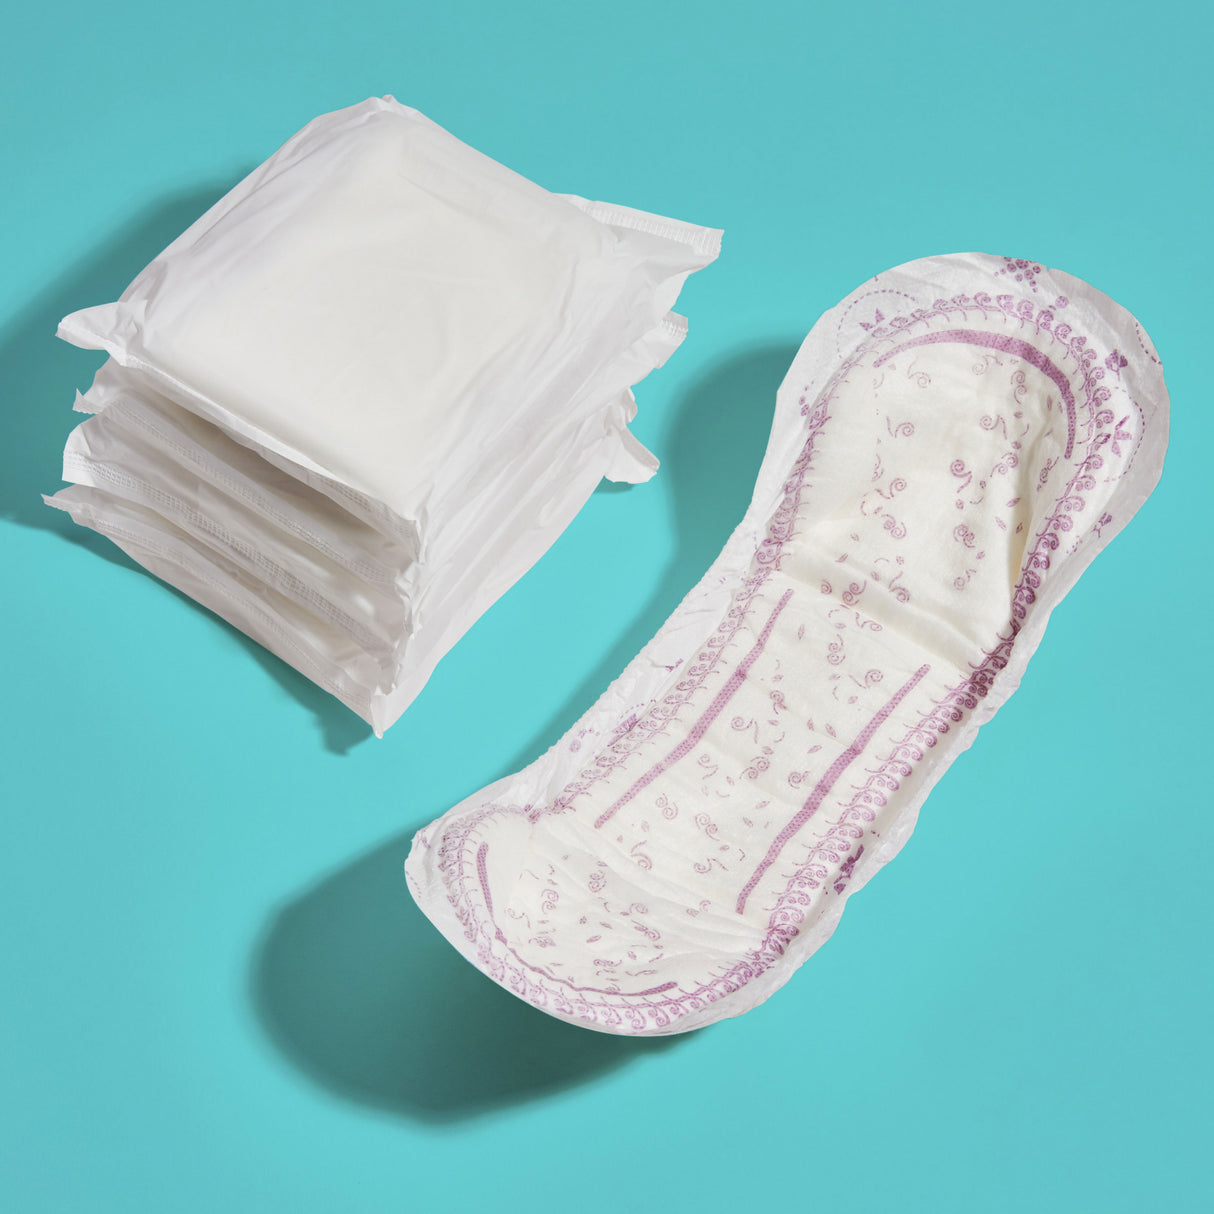 An overnight pad that looks contoured to the body with a nice curvature